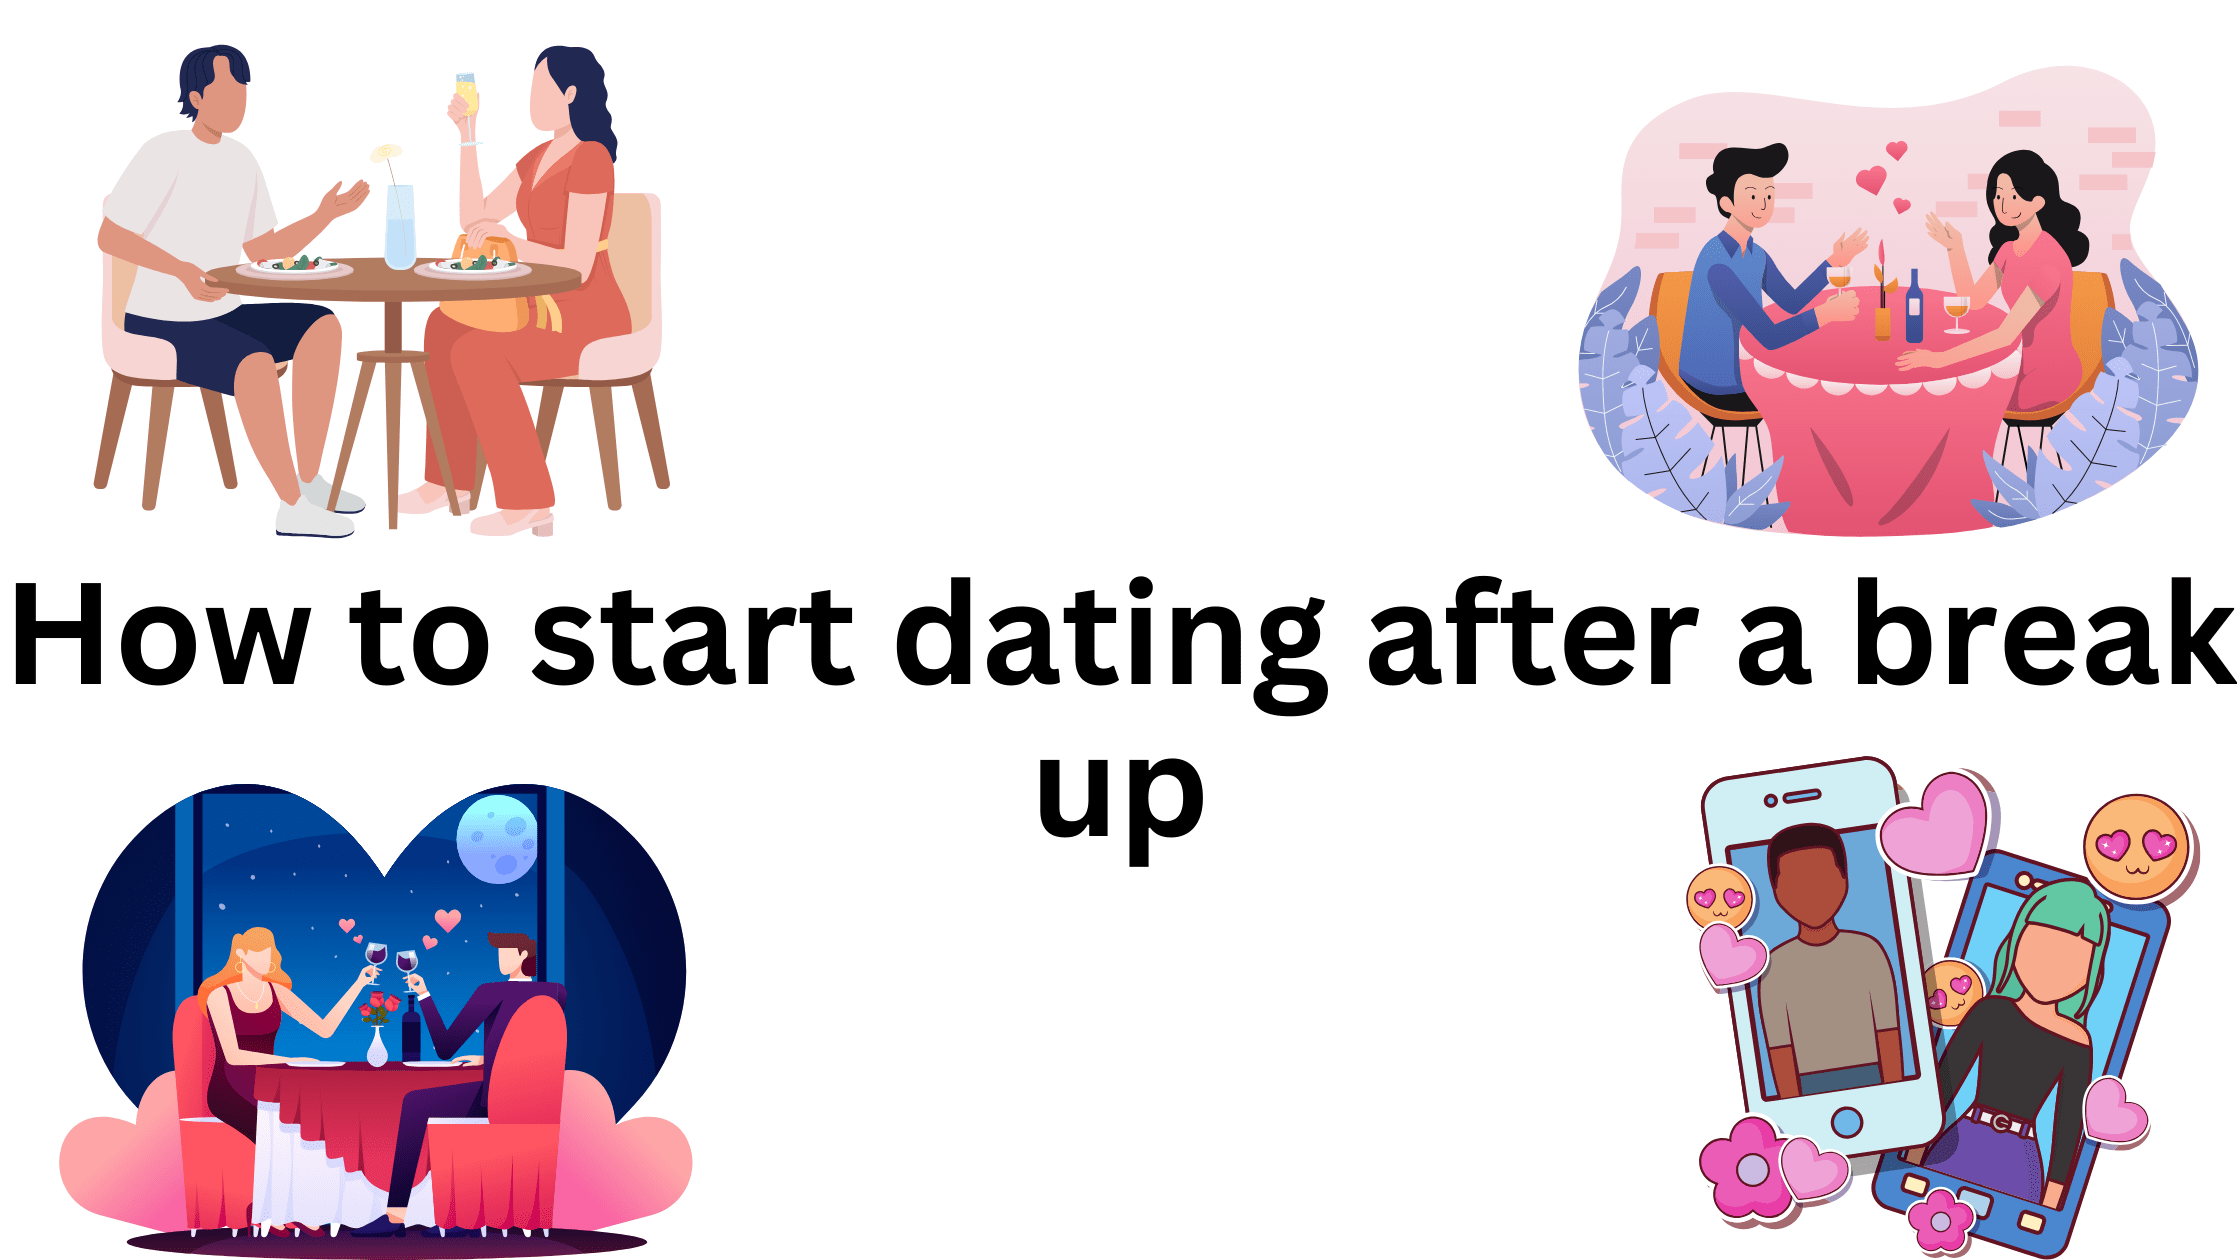 10 Great Ways to Start Dating After a Break Up 3